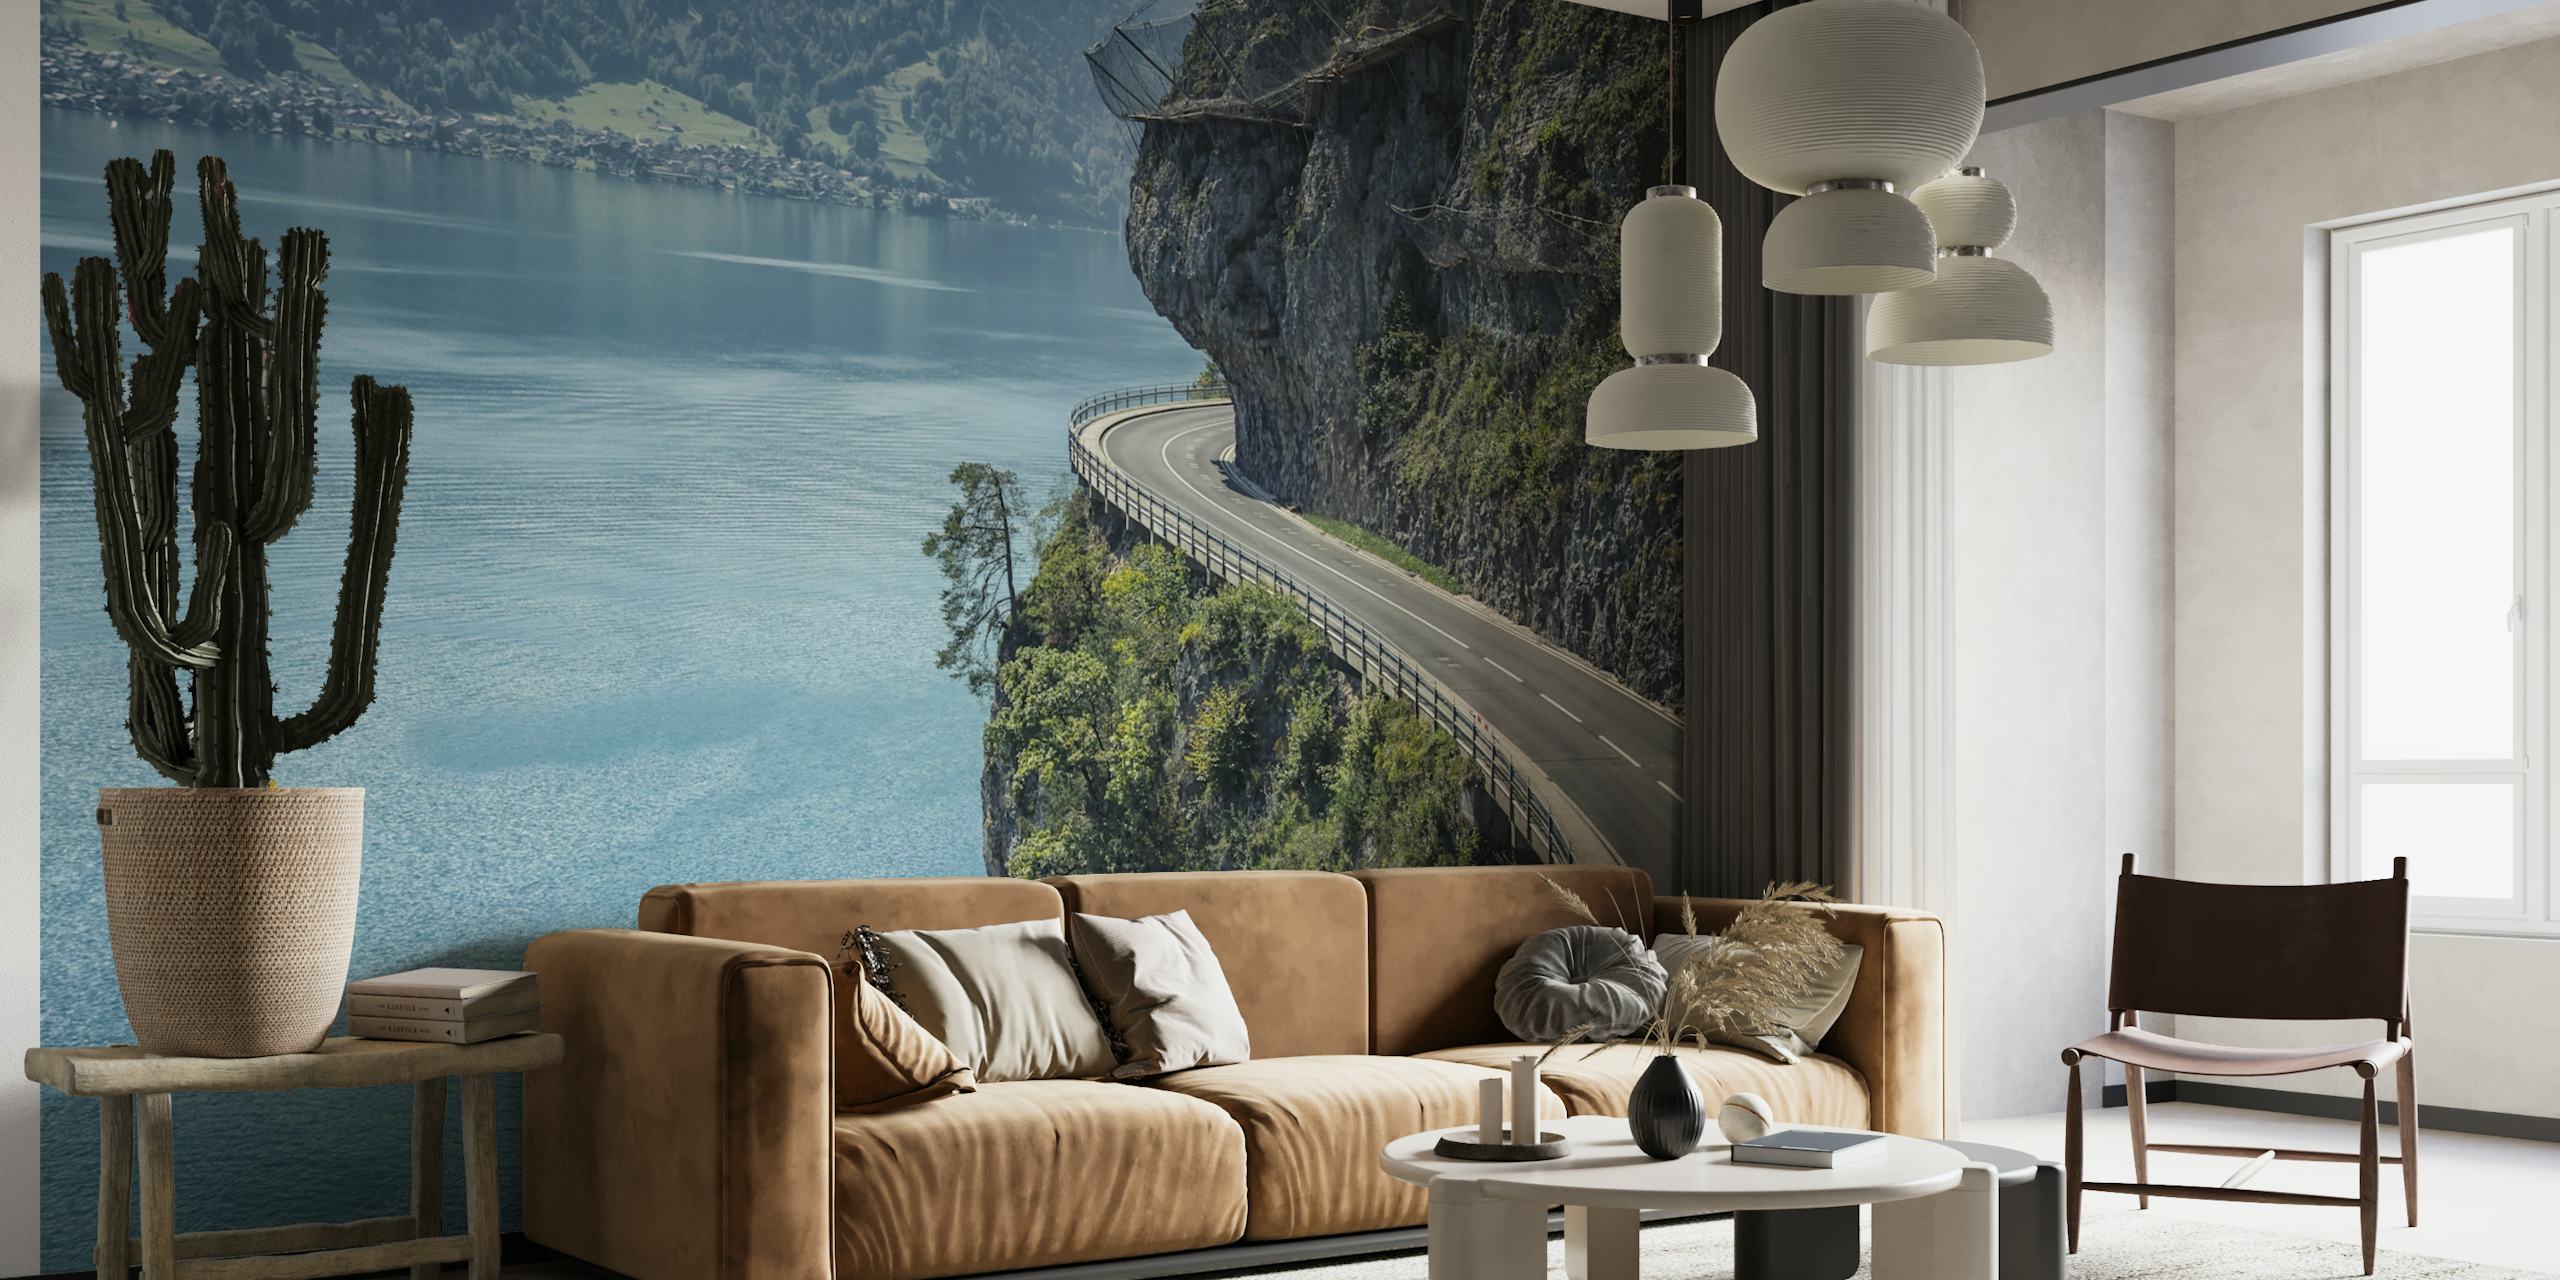 Winding mountain road with scenic lake view wall mural